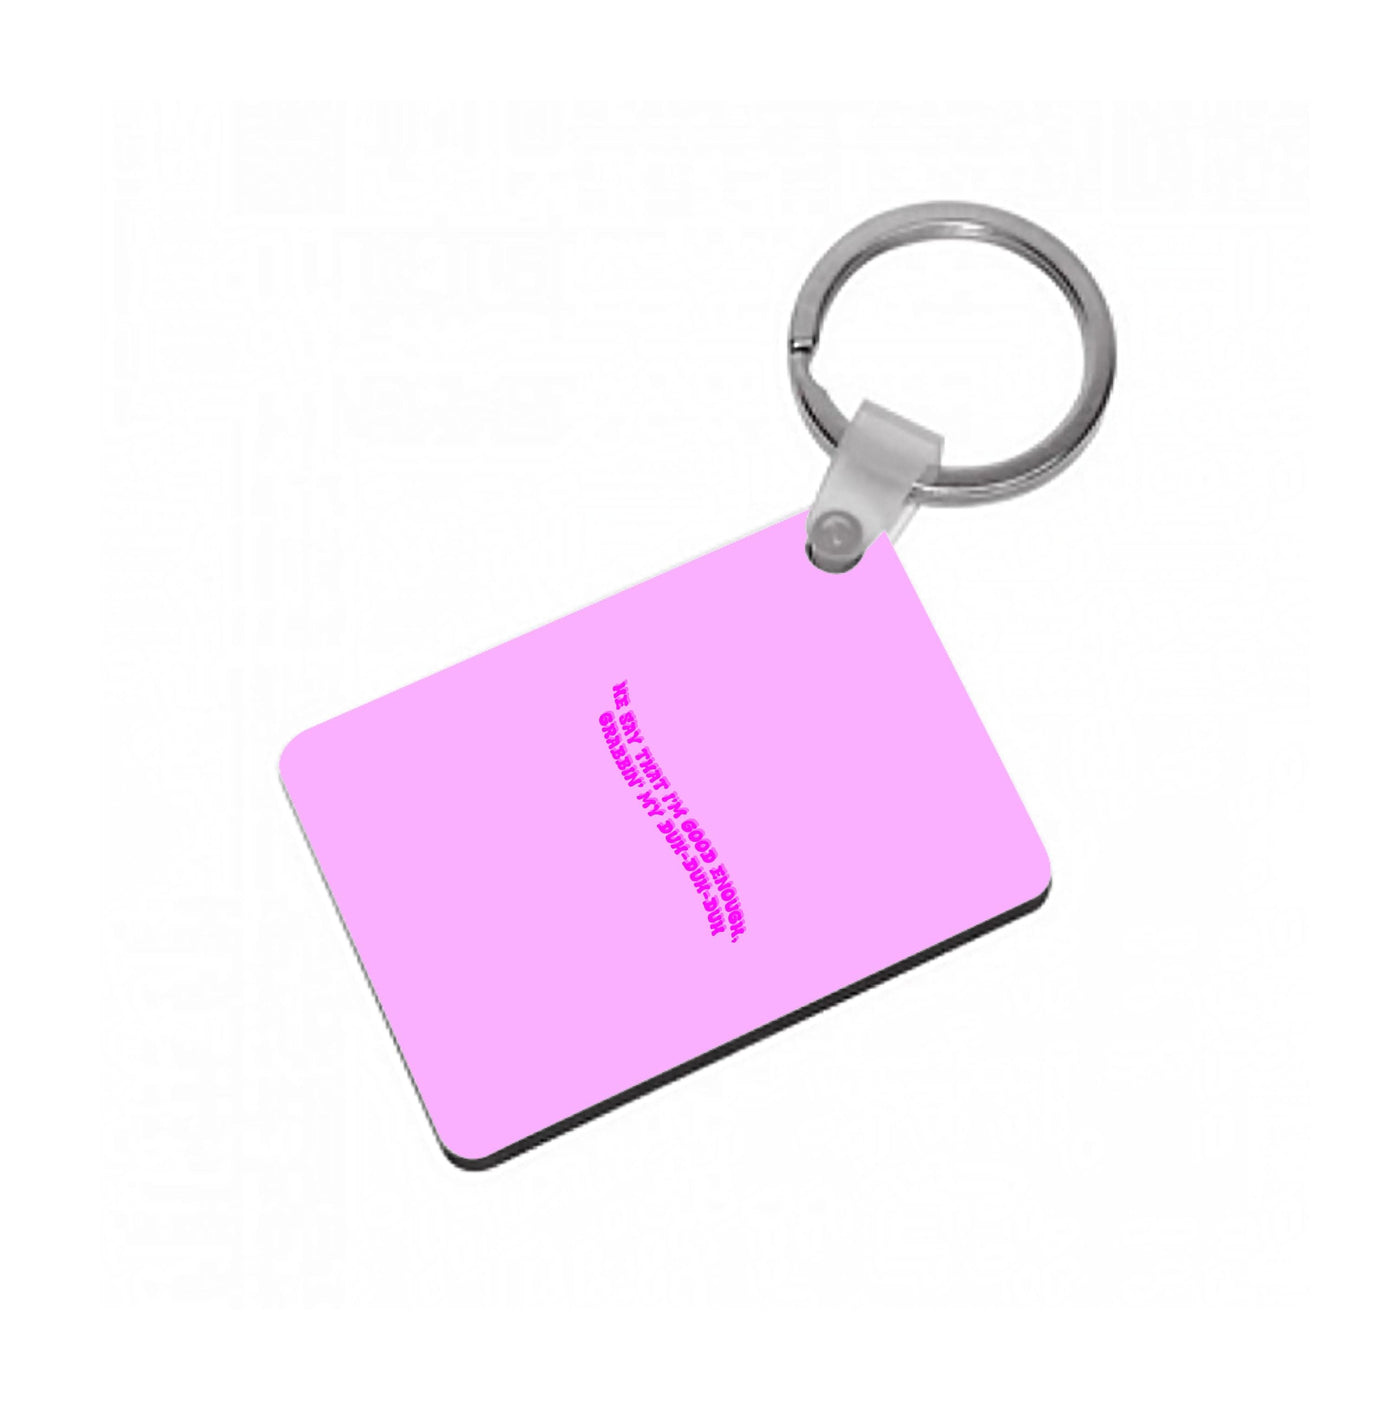 He Say That I'm Good Enough - Ice Spice Keyring